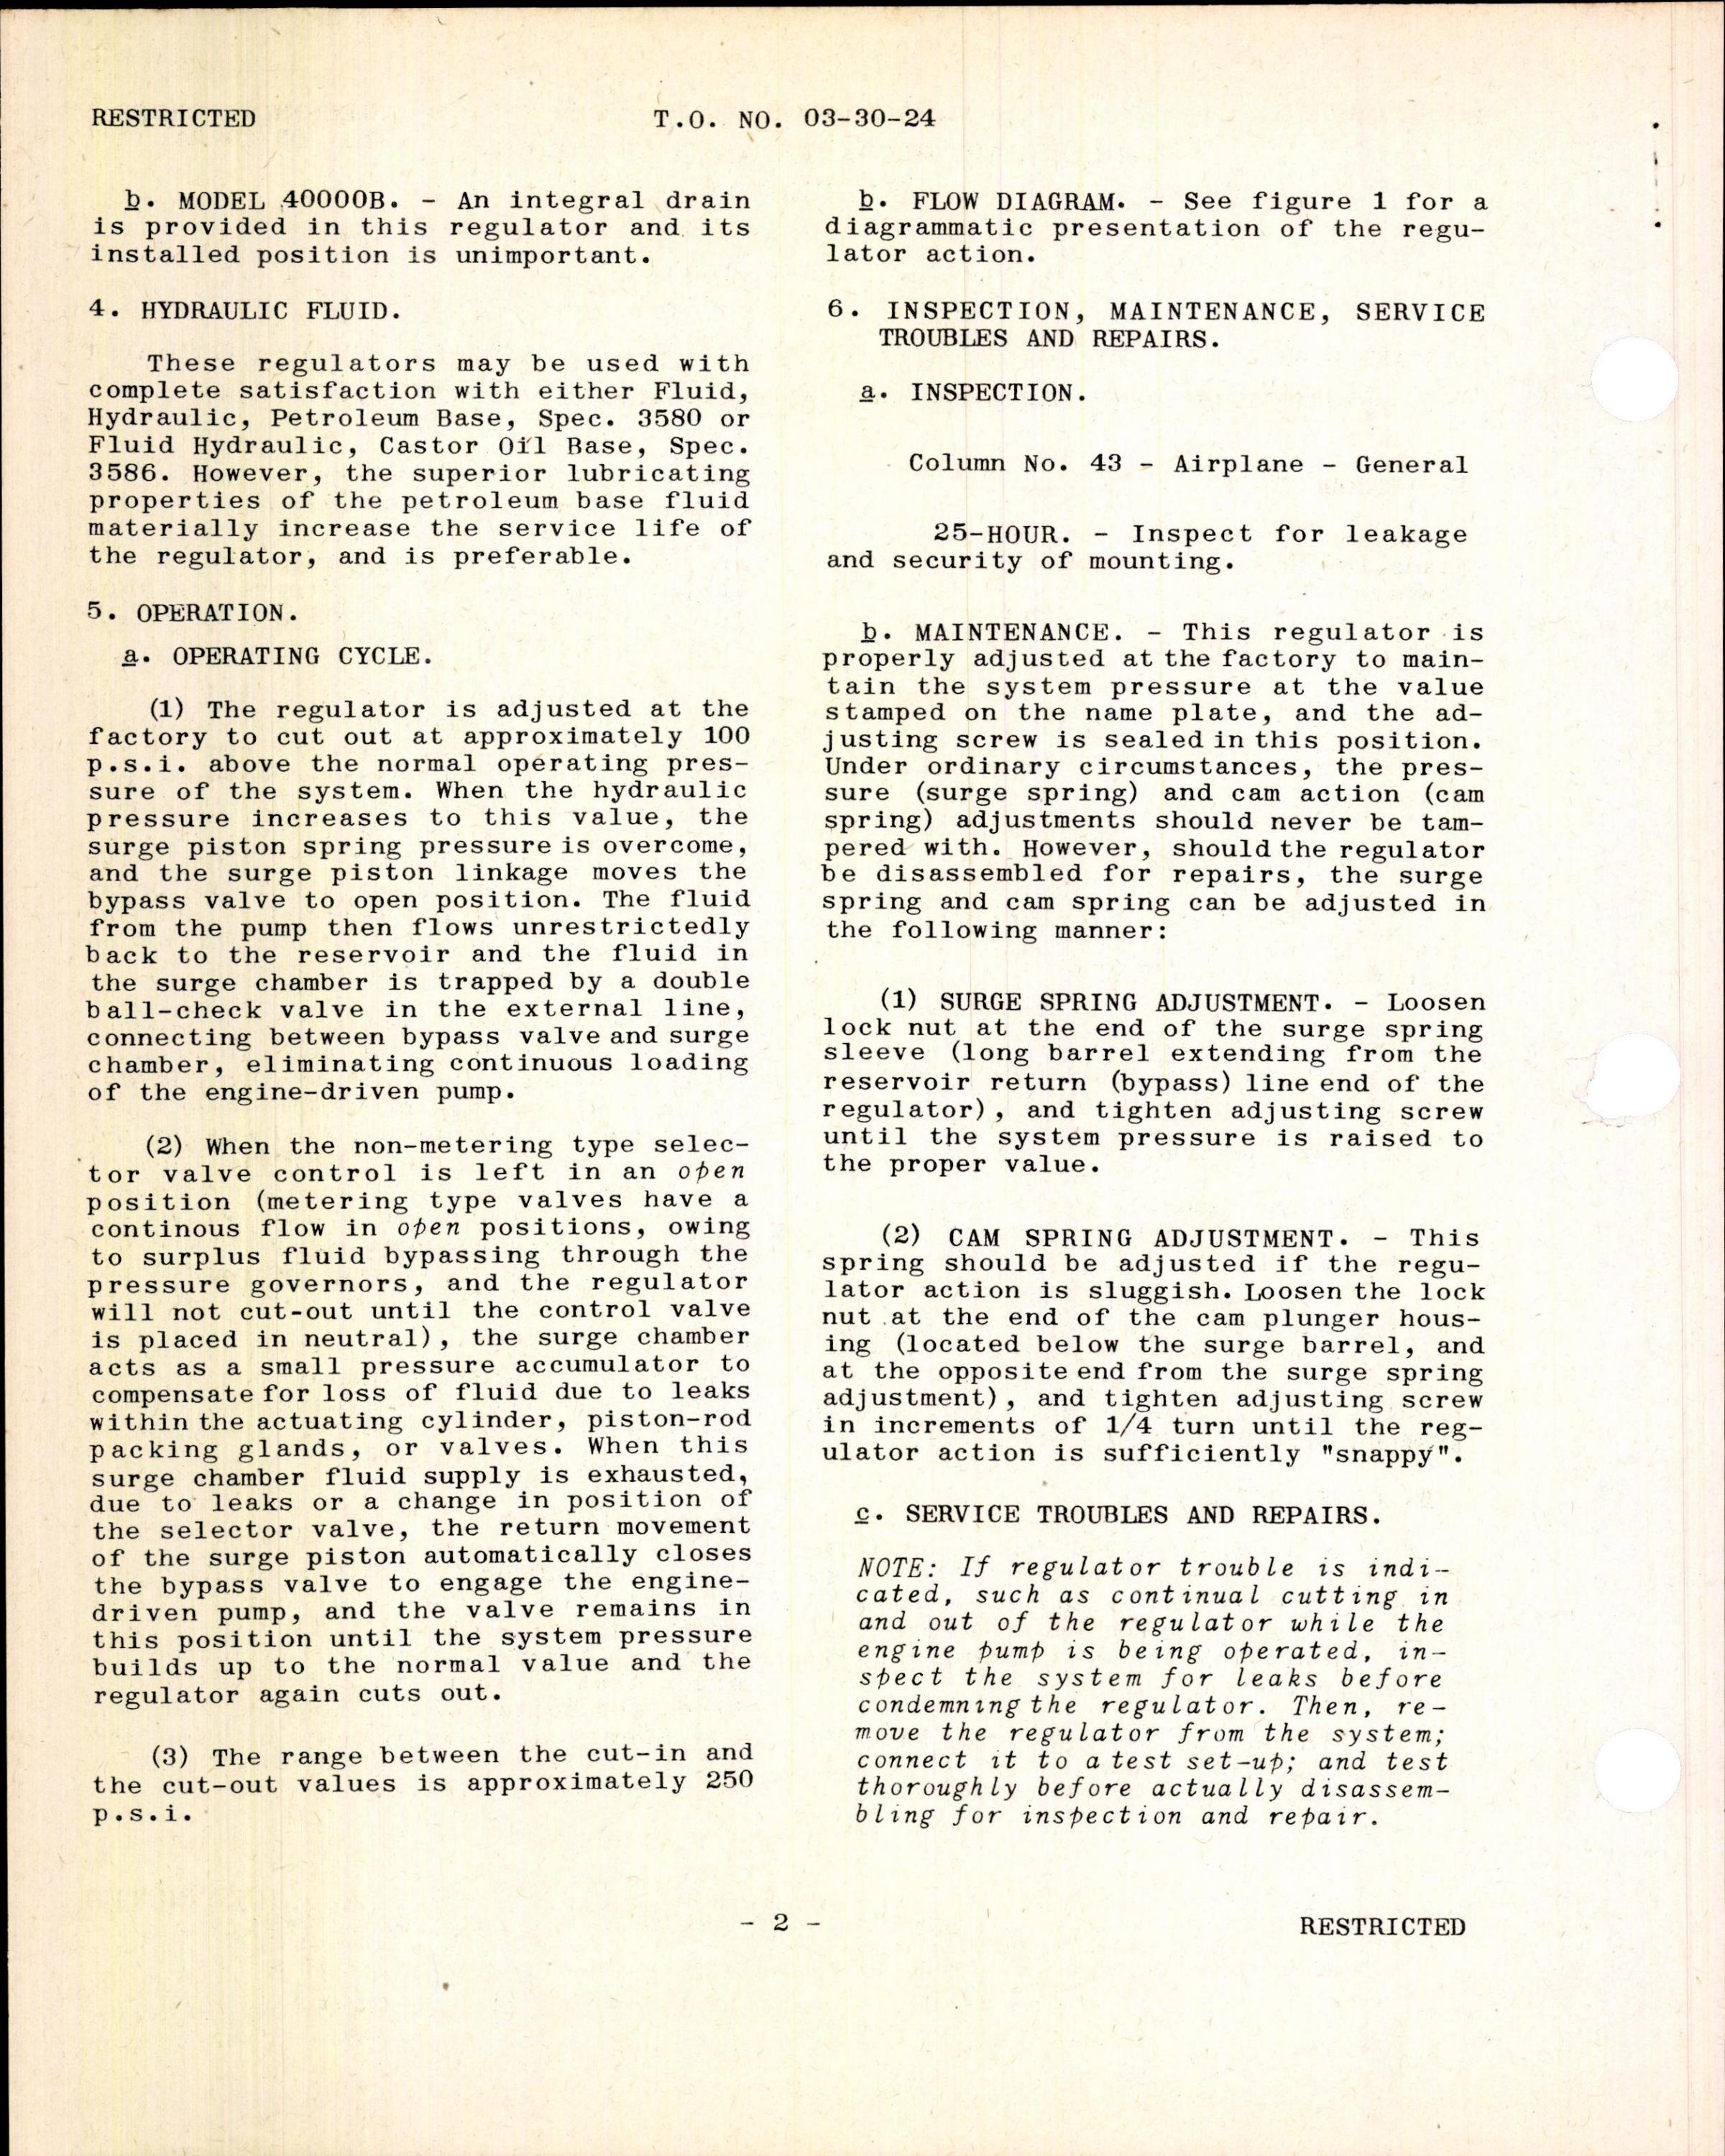 Sample page 2 from AirCorps Library document: Instructions for Automatic Pressure Regulator Hydraulic System